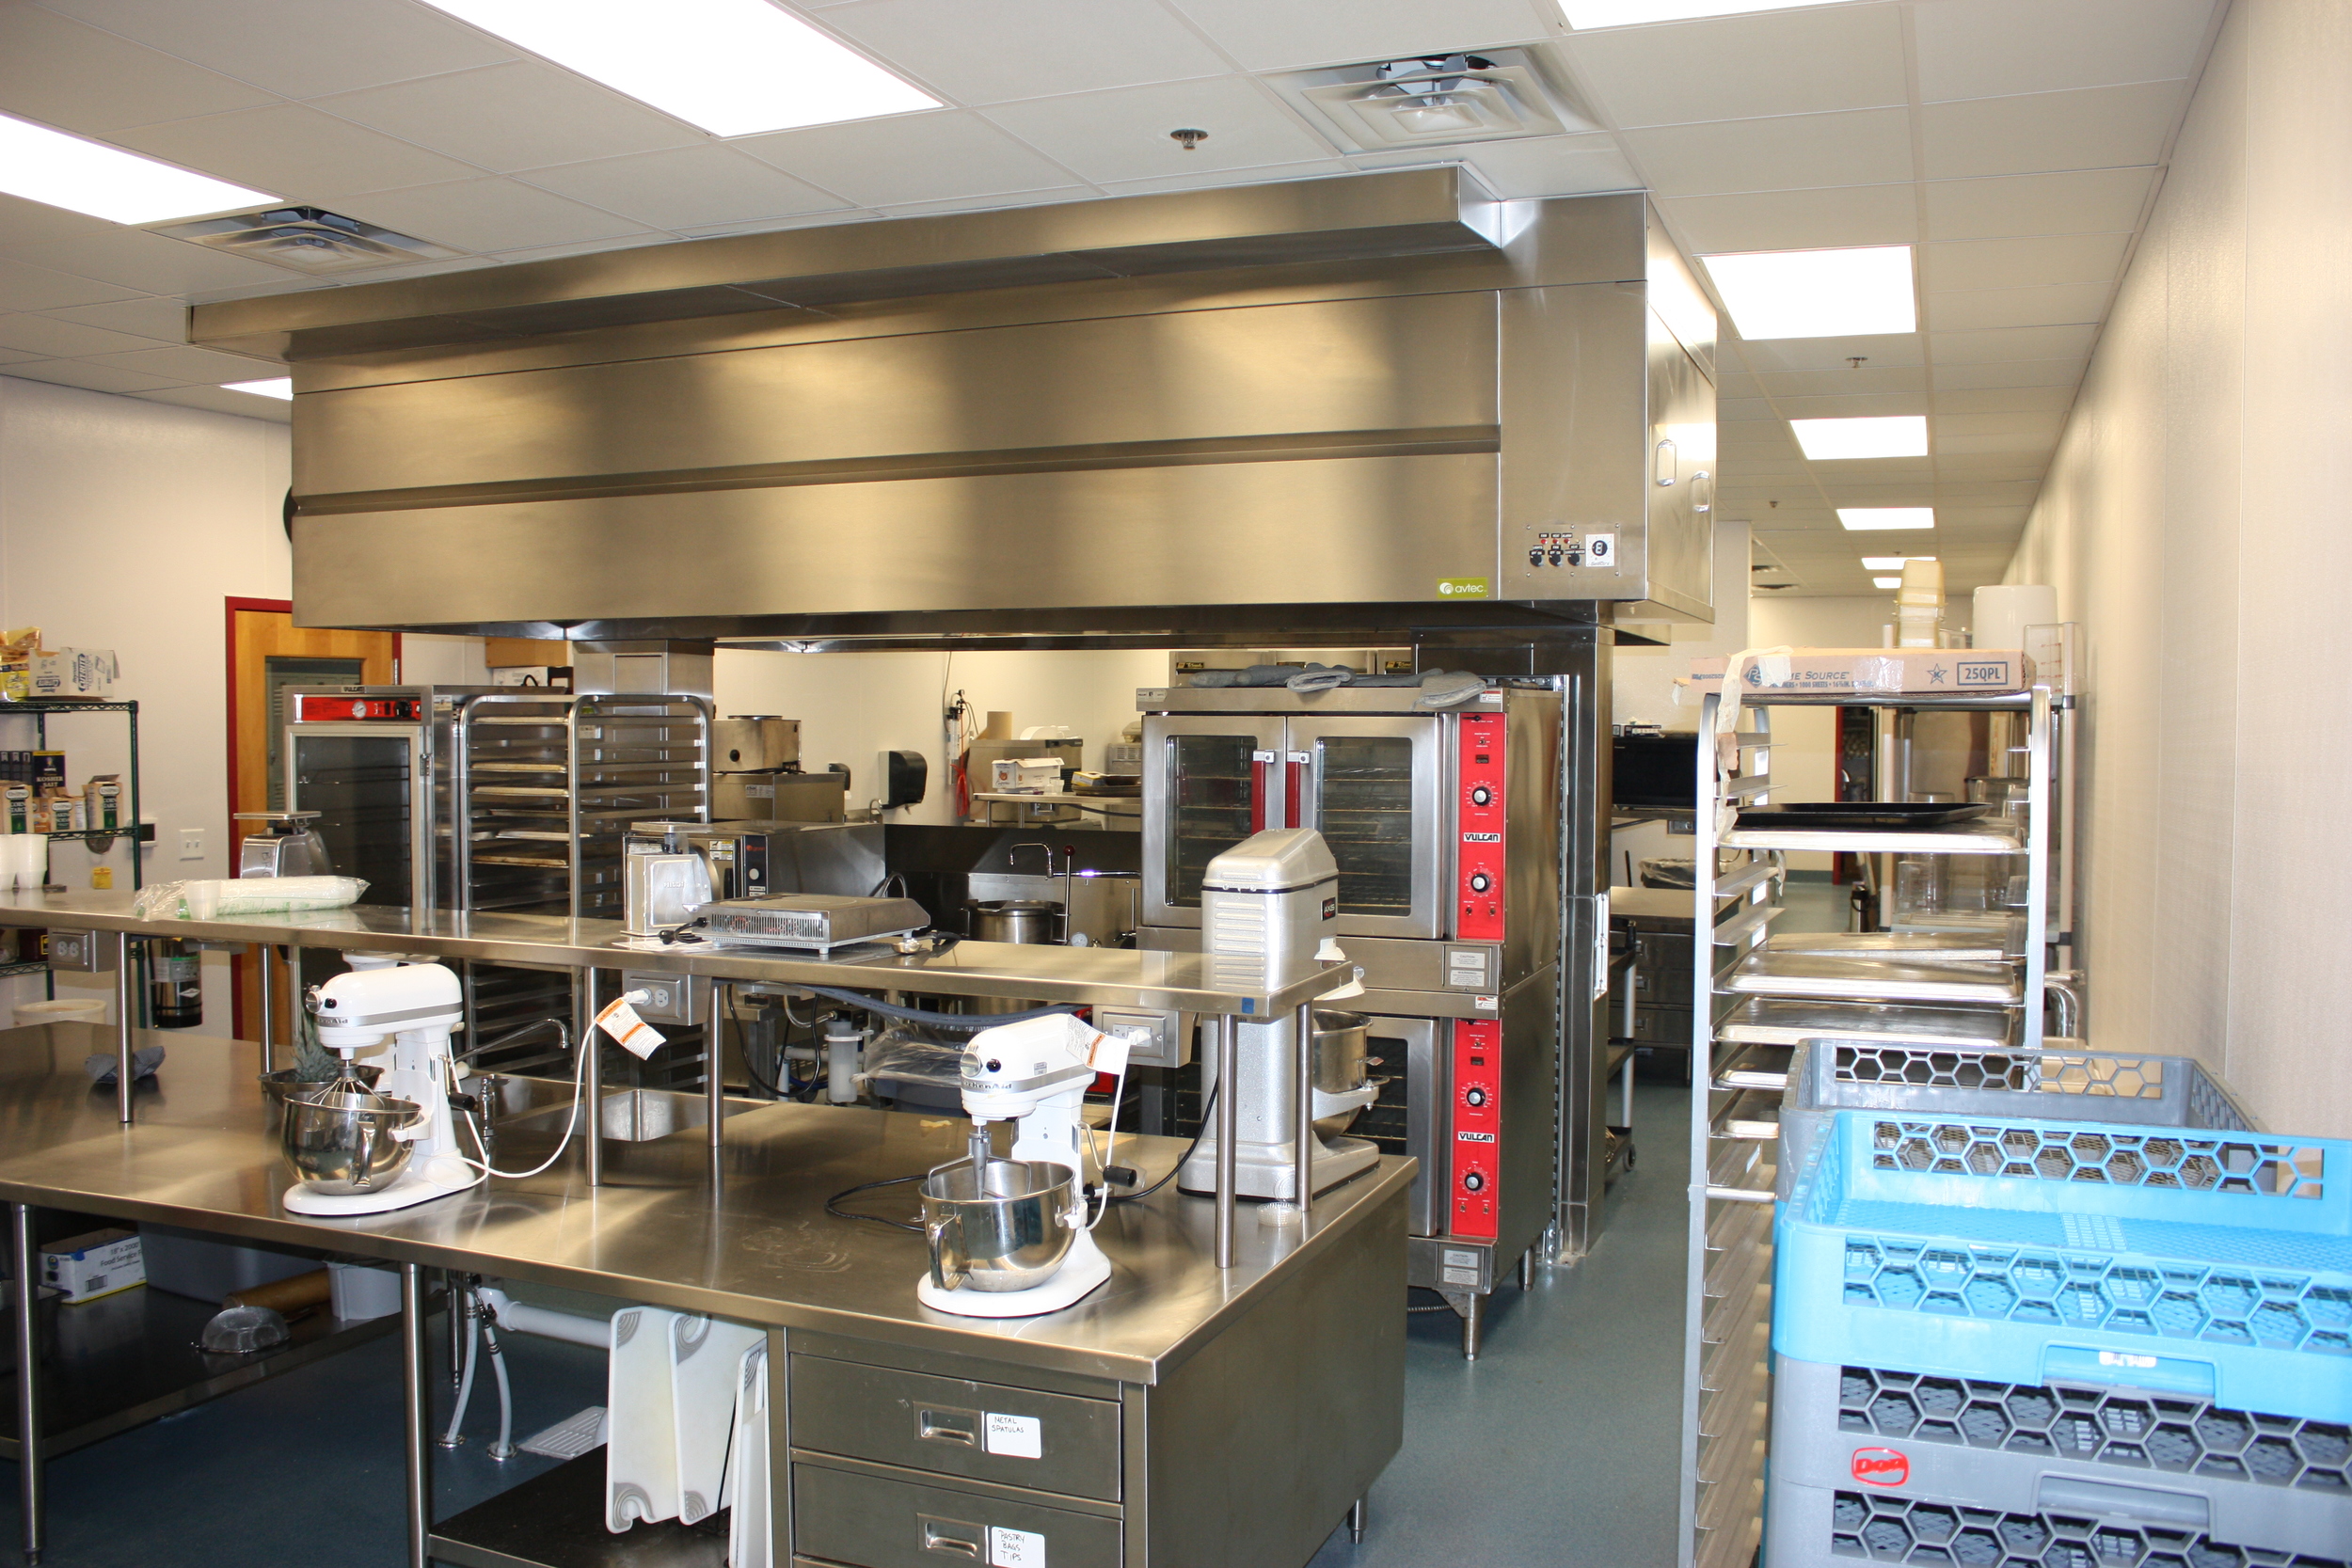 BLUE RIVER CAREER CENTER - CULINARY KITCHEN